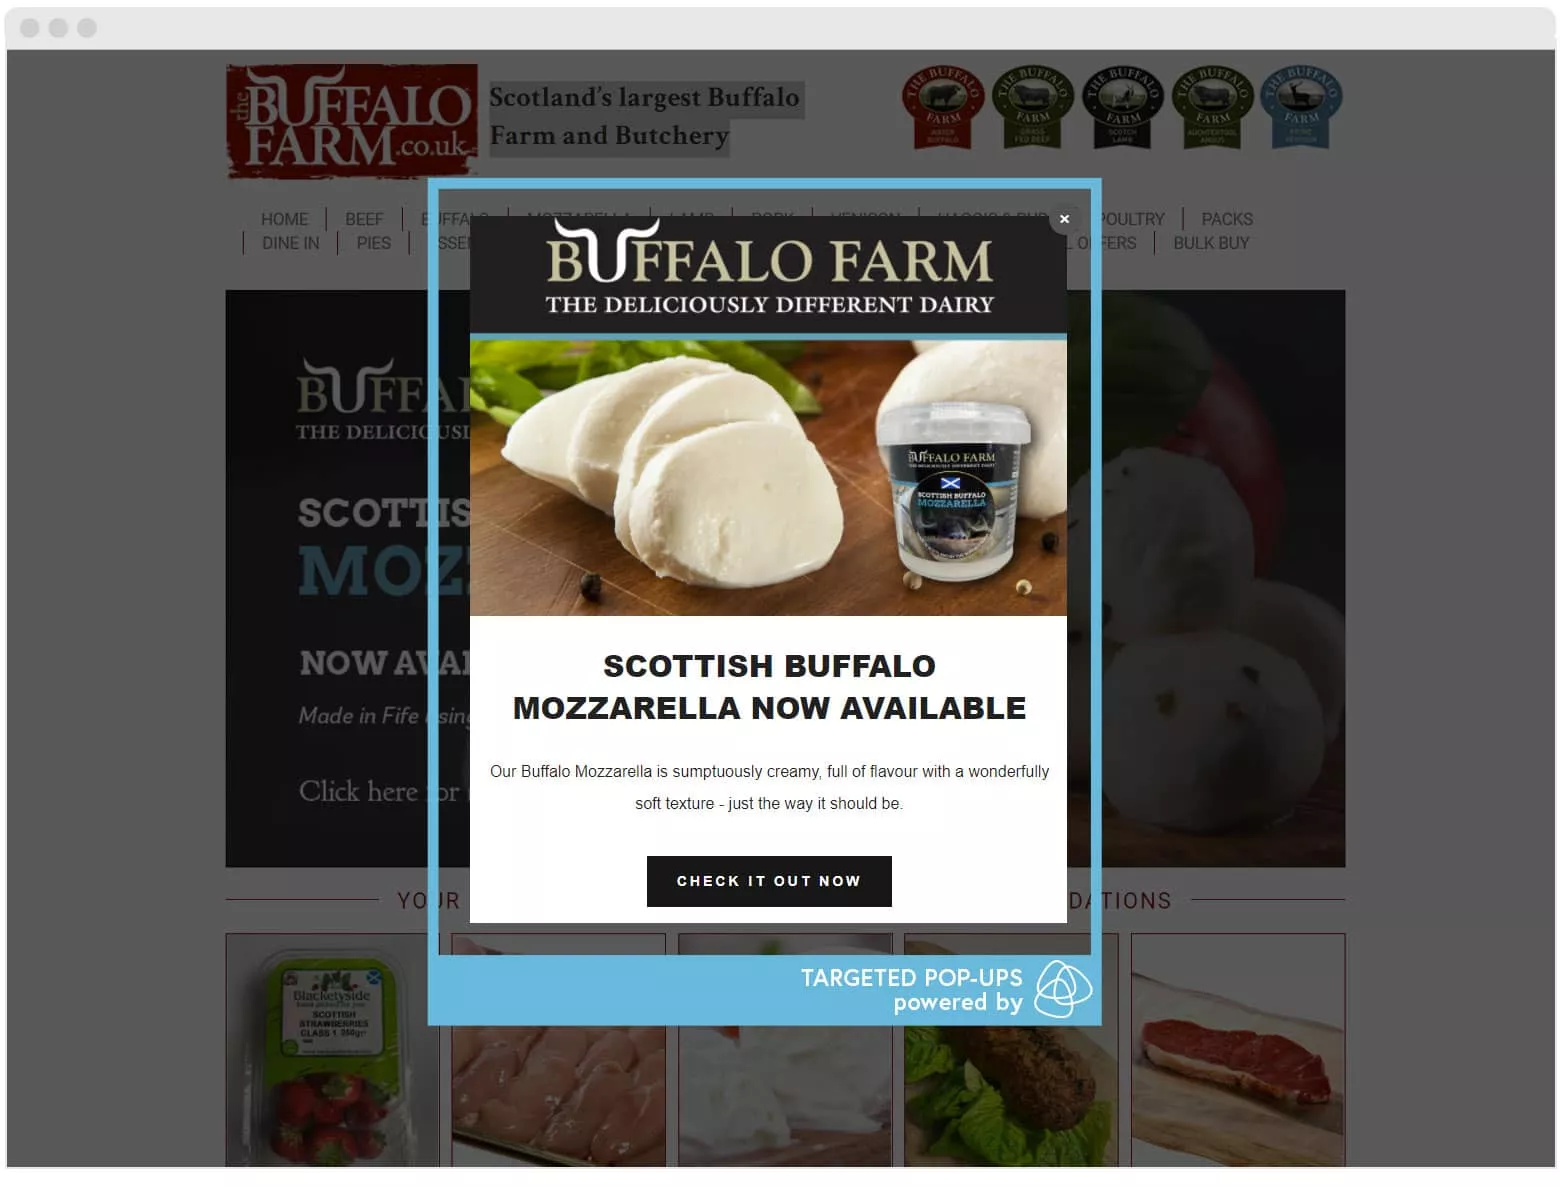 The Buffalo Farm’s use a homepage pop-up to increase product awareness